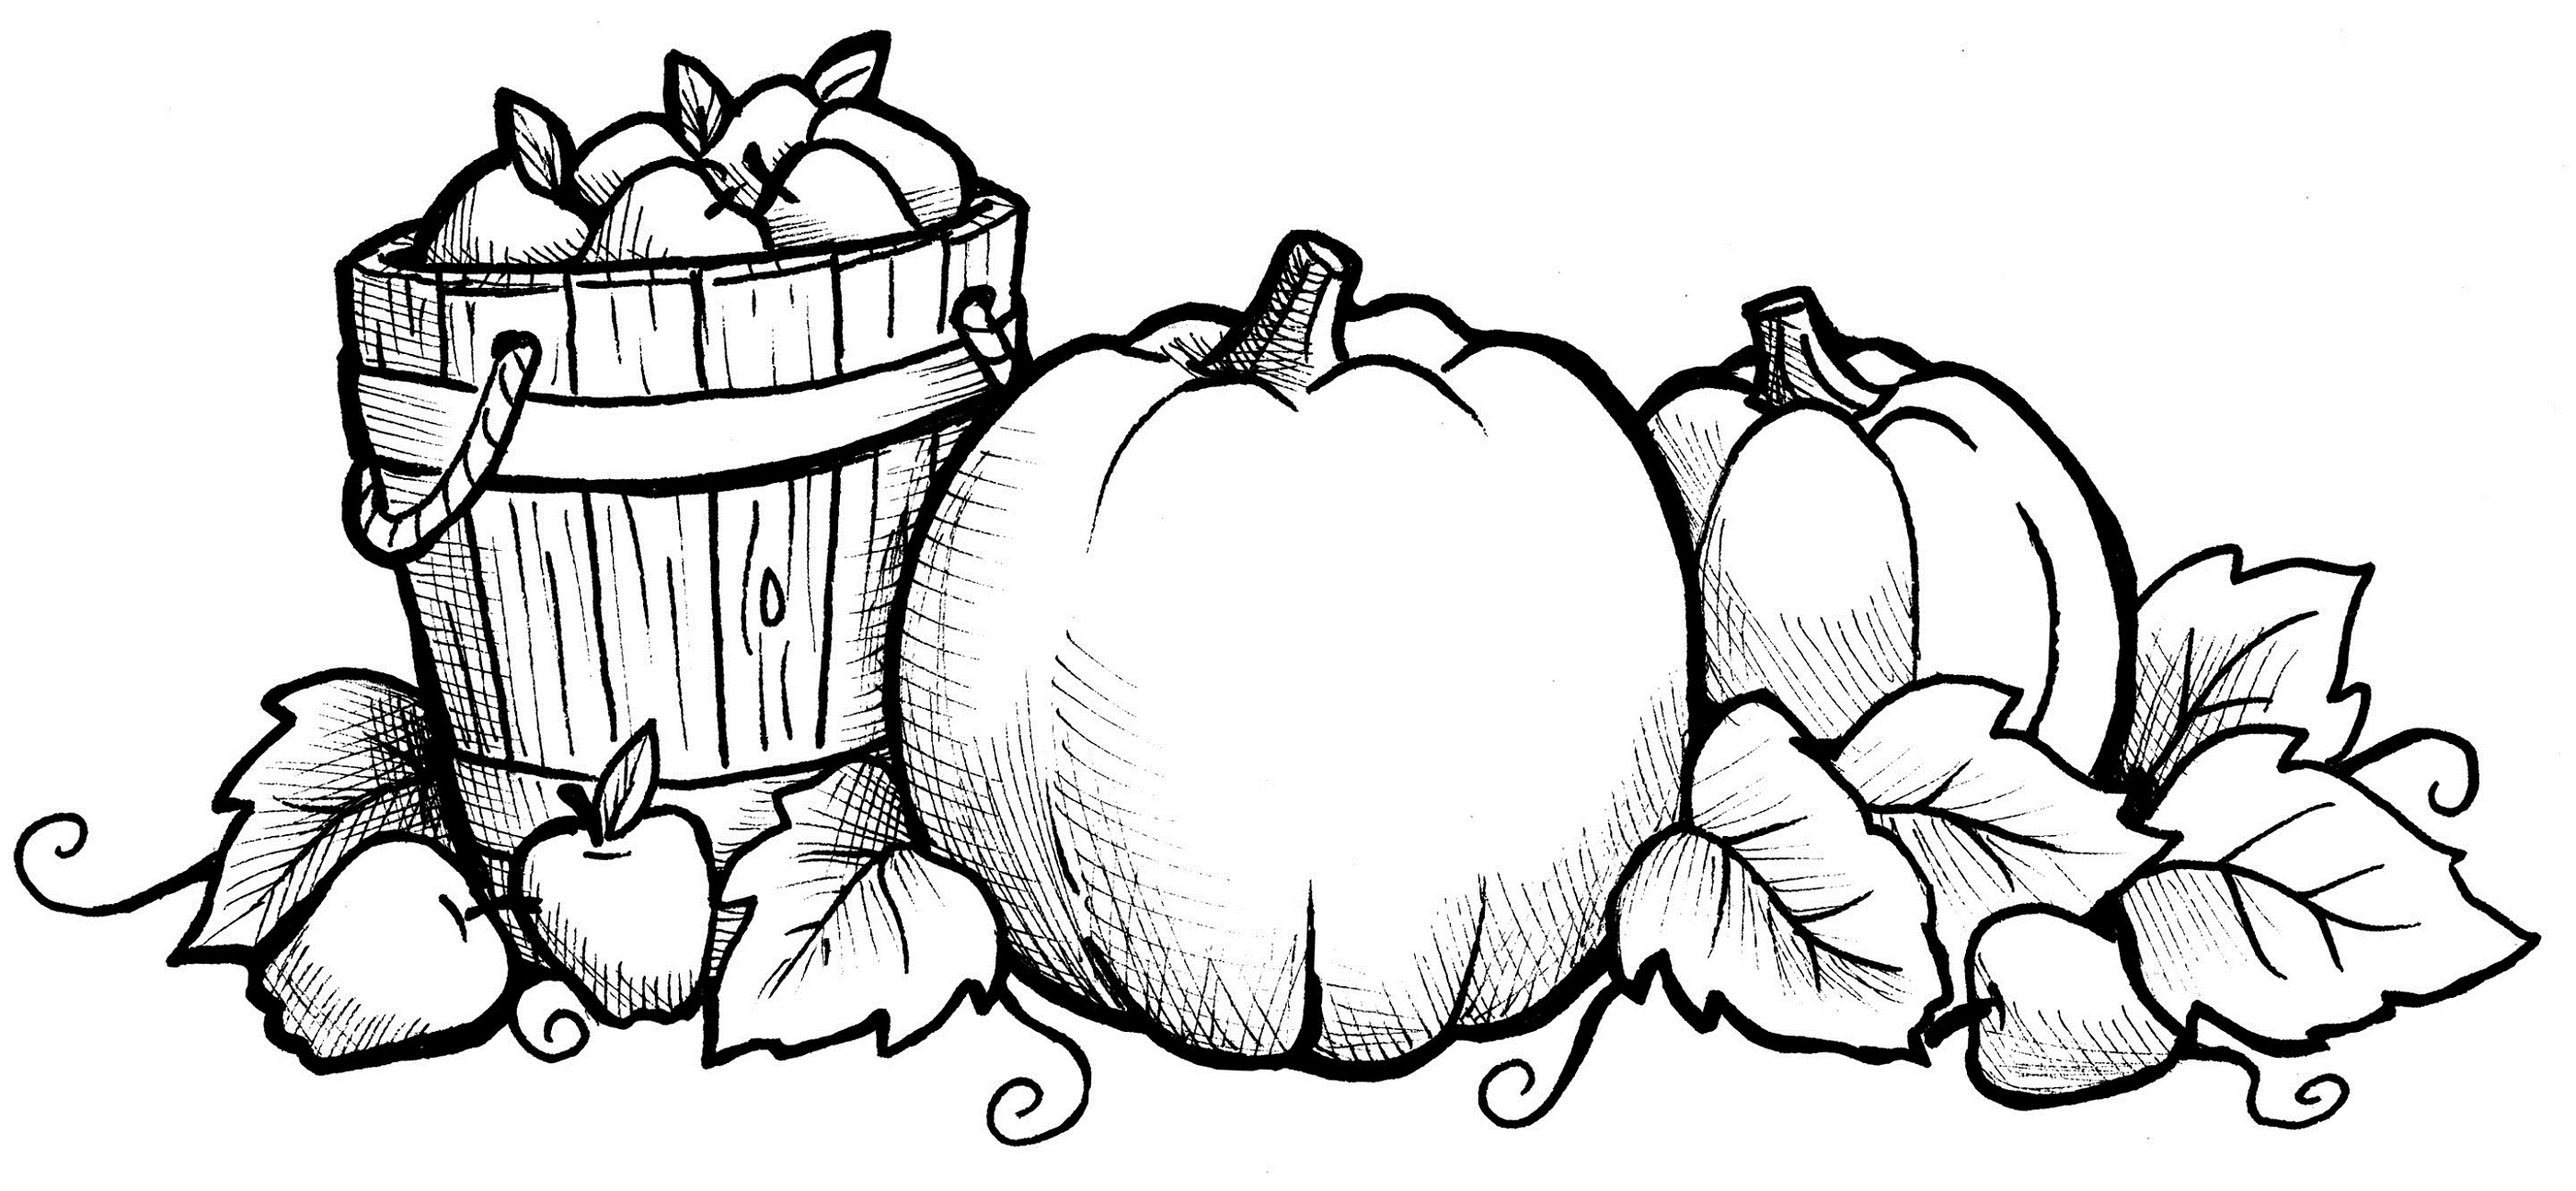 fall pumpkins coloring pages